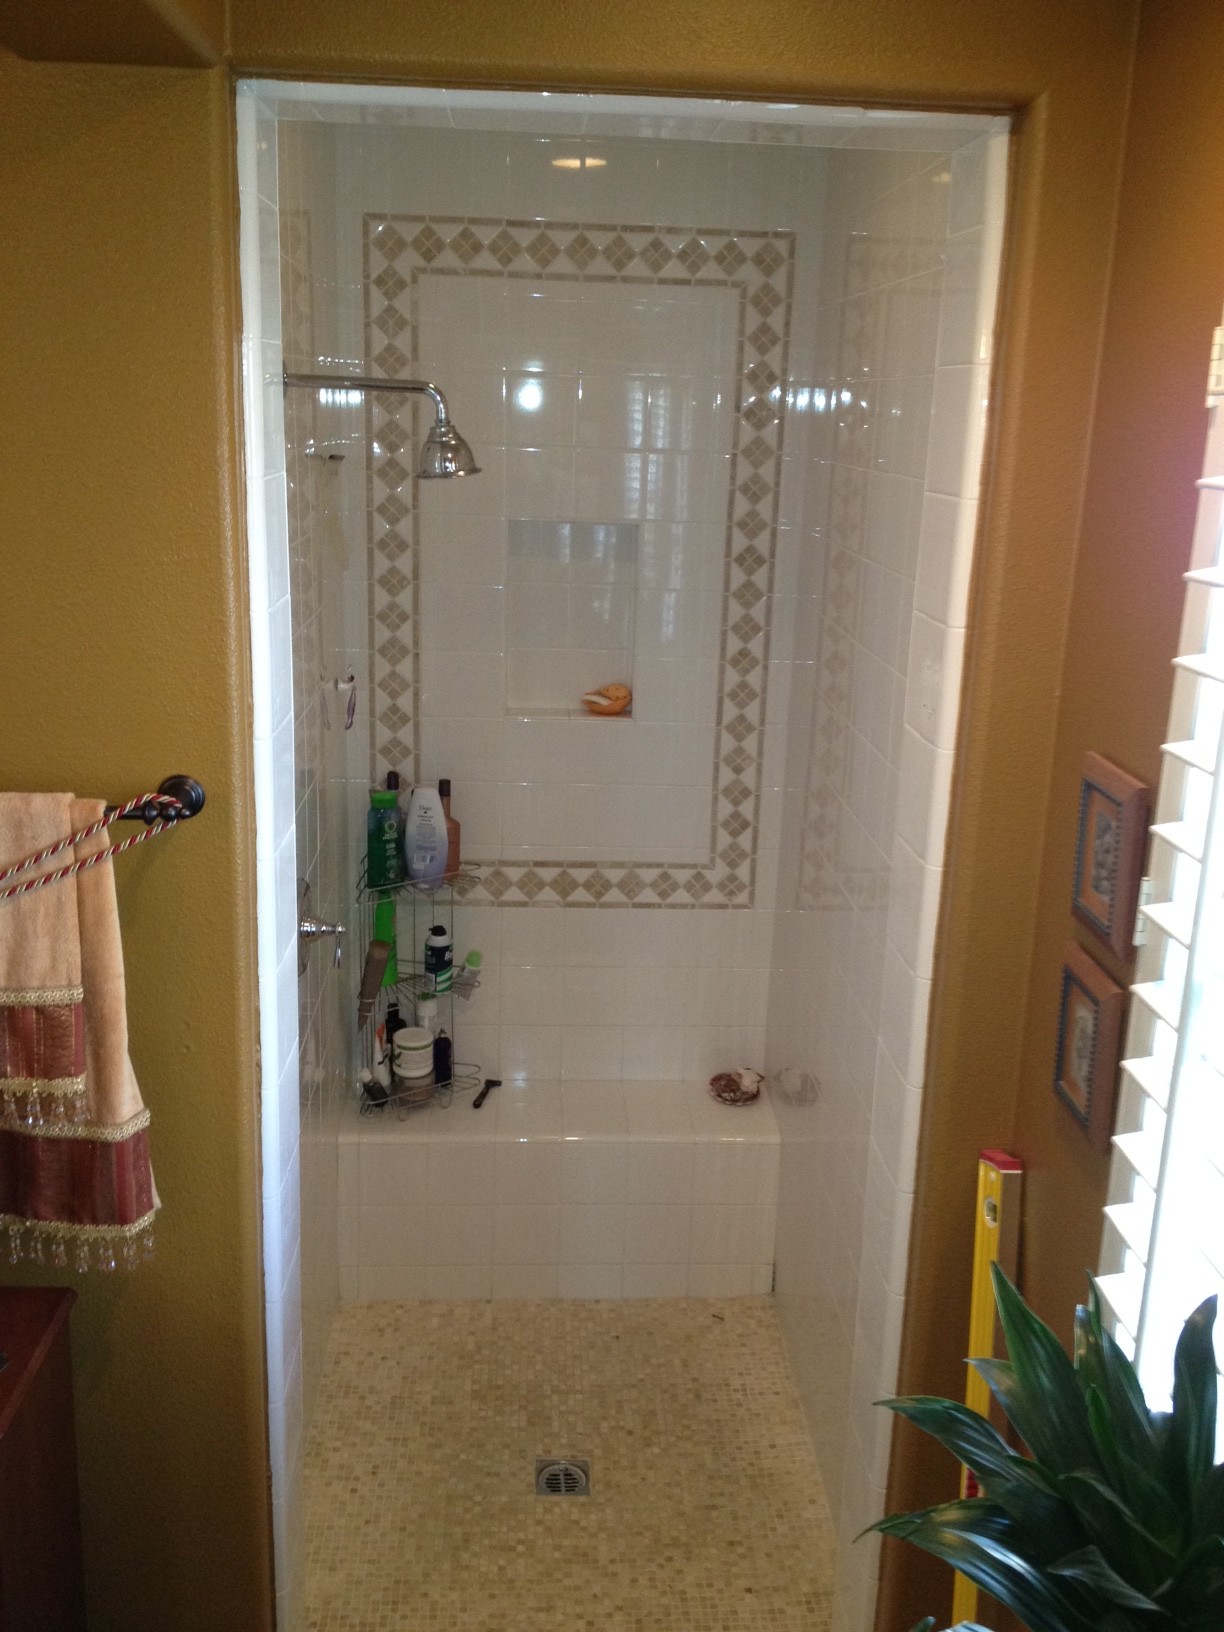 We replace worn shower doors and replace them with quality hardware